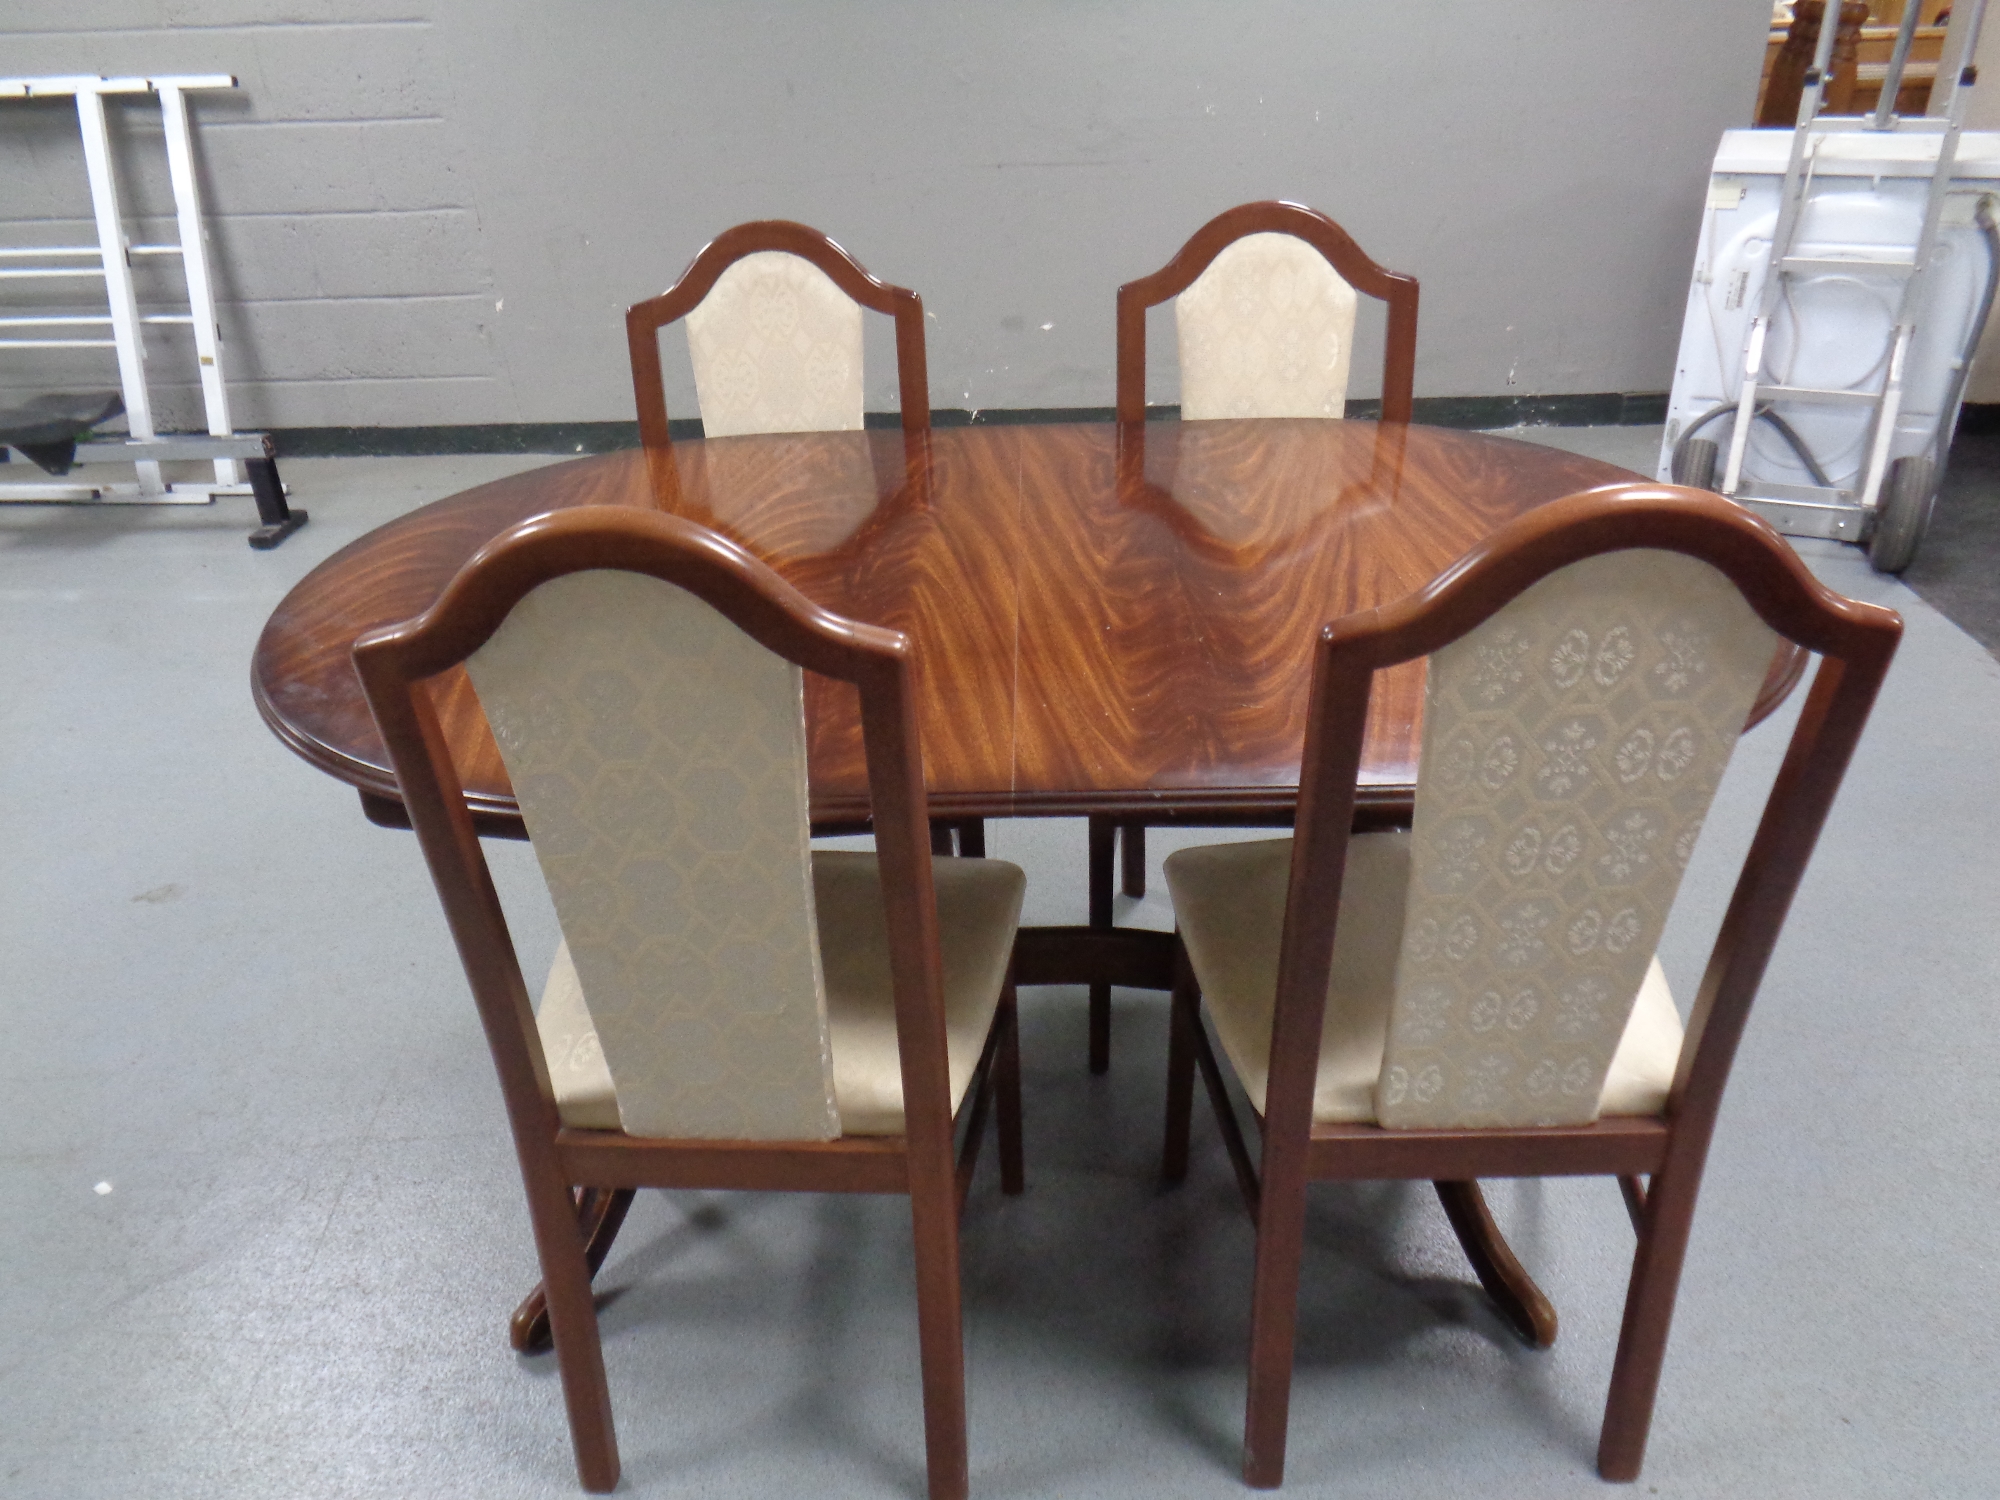 An oval extending dining table together with a set of four chairs in a mahogany finish